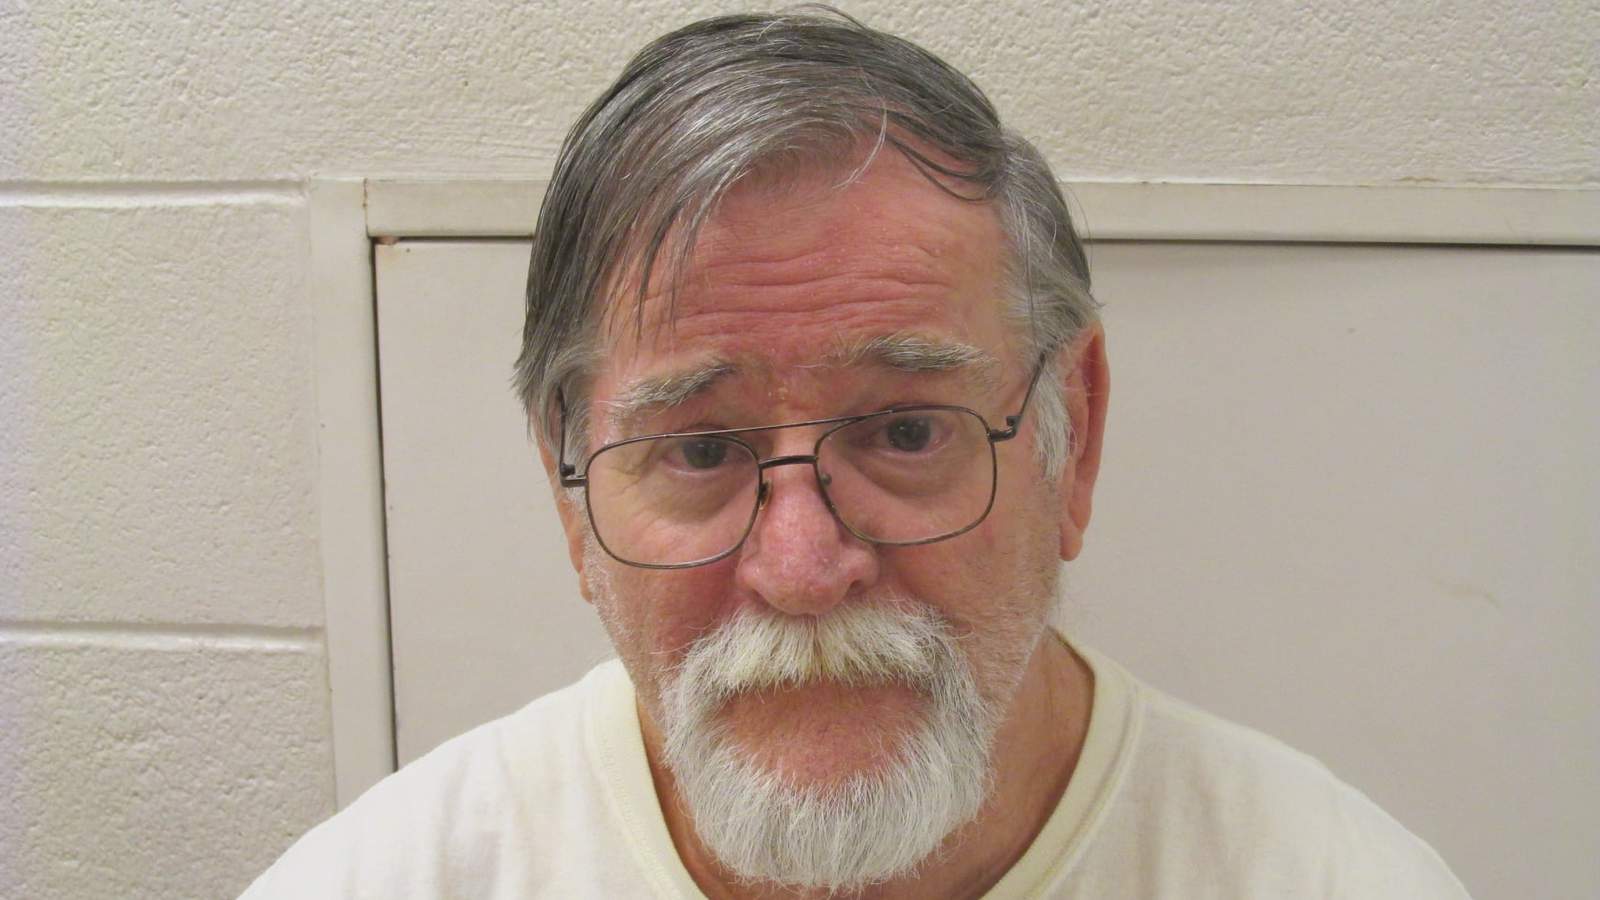 72-year-old man admits to distribution, possession of child pornography in Wythe County